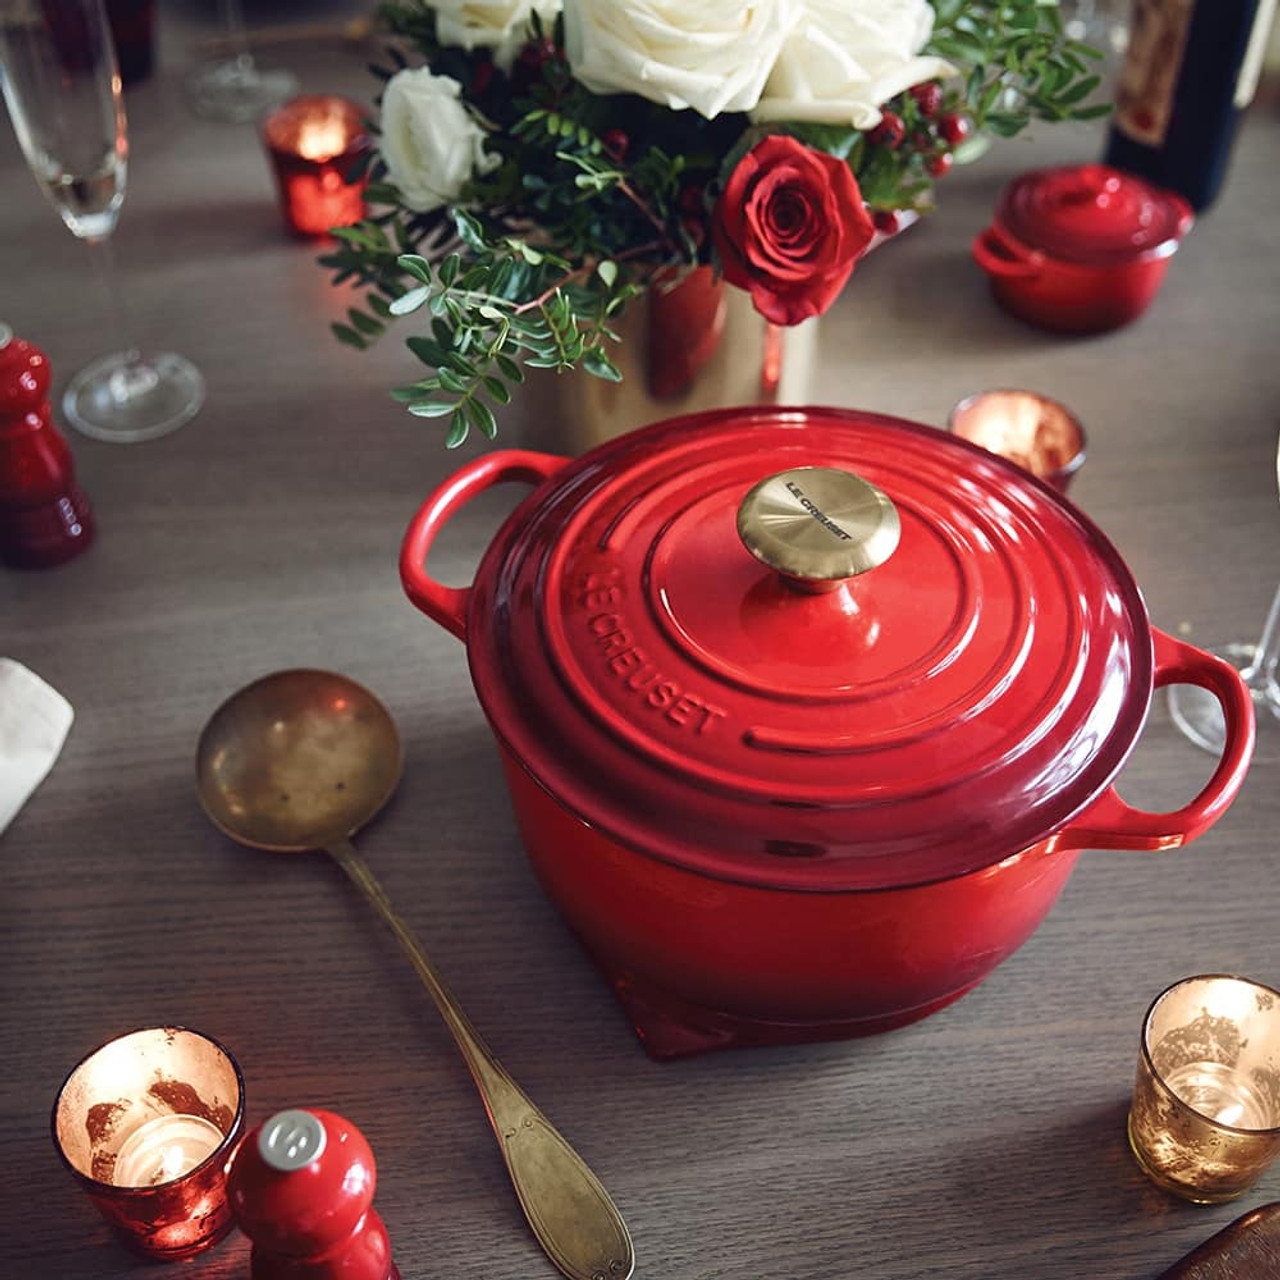 https://cdn11.bigcommerce.com/s-hccytny0od/images/stencil/1280x1280/products/1900/6469/le-creuset-cast-iron-mini-cocotte__20158.1536332531.jpg?c=2?imbypass=on